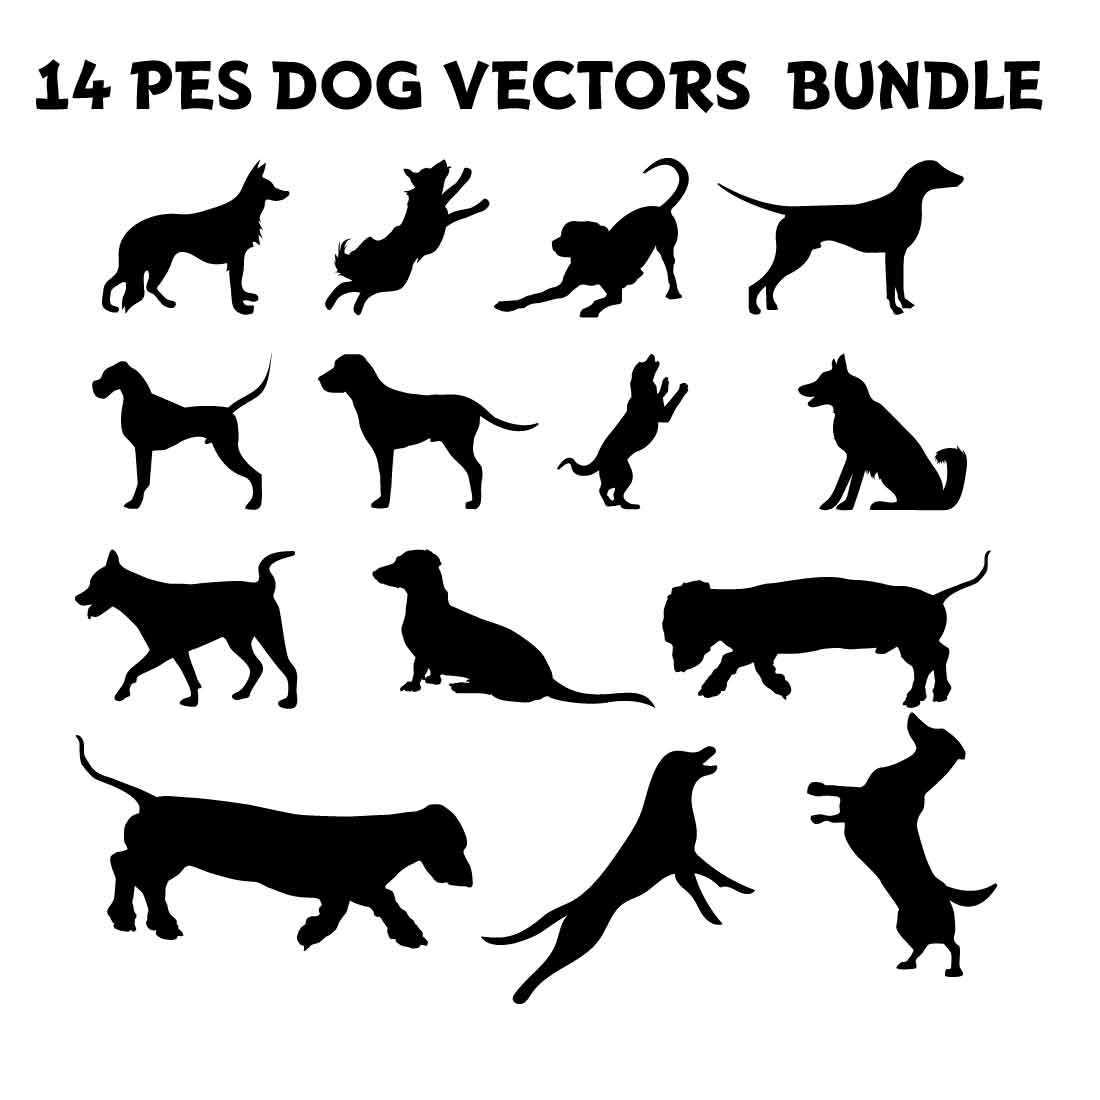 Pes Dog Vector Icon Bundle cover image.